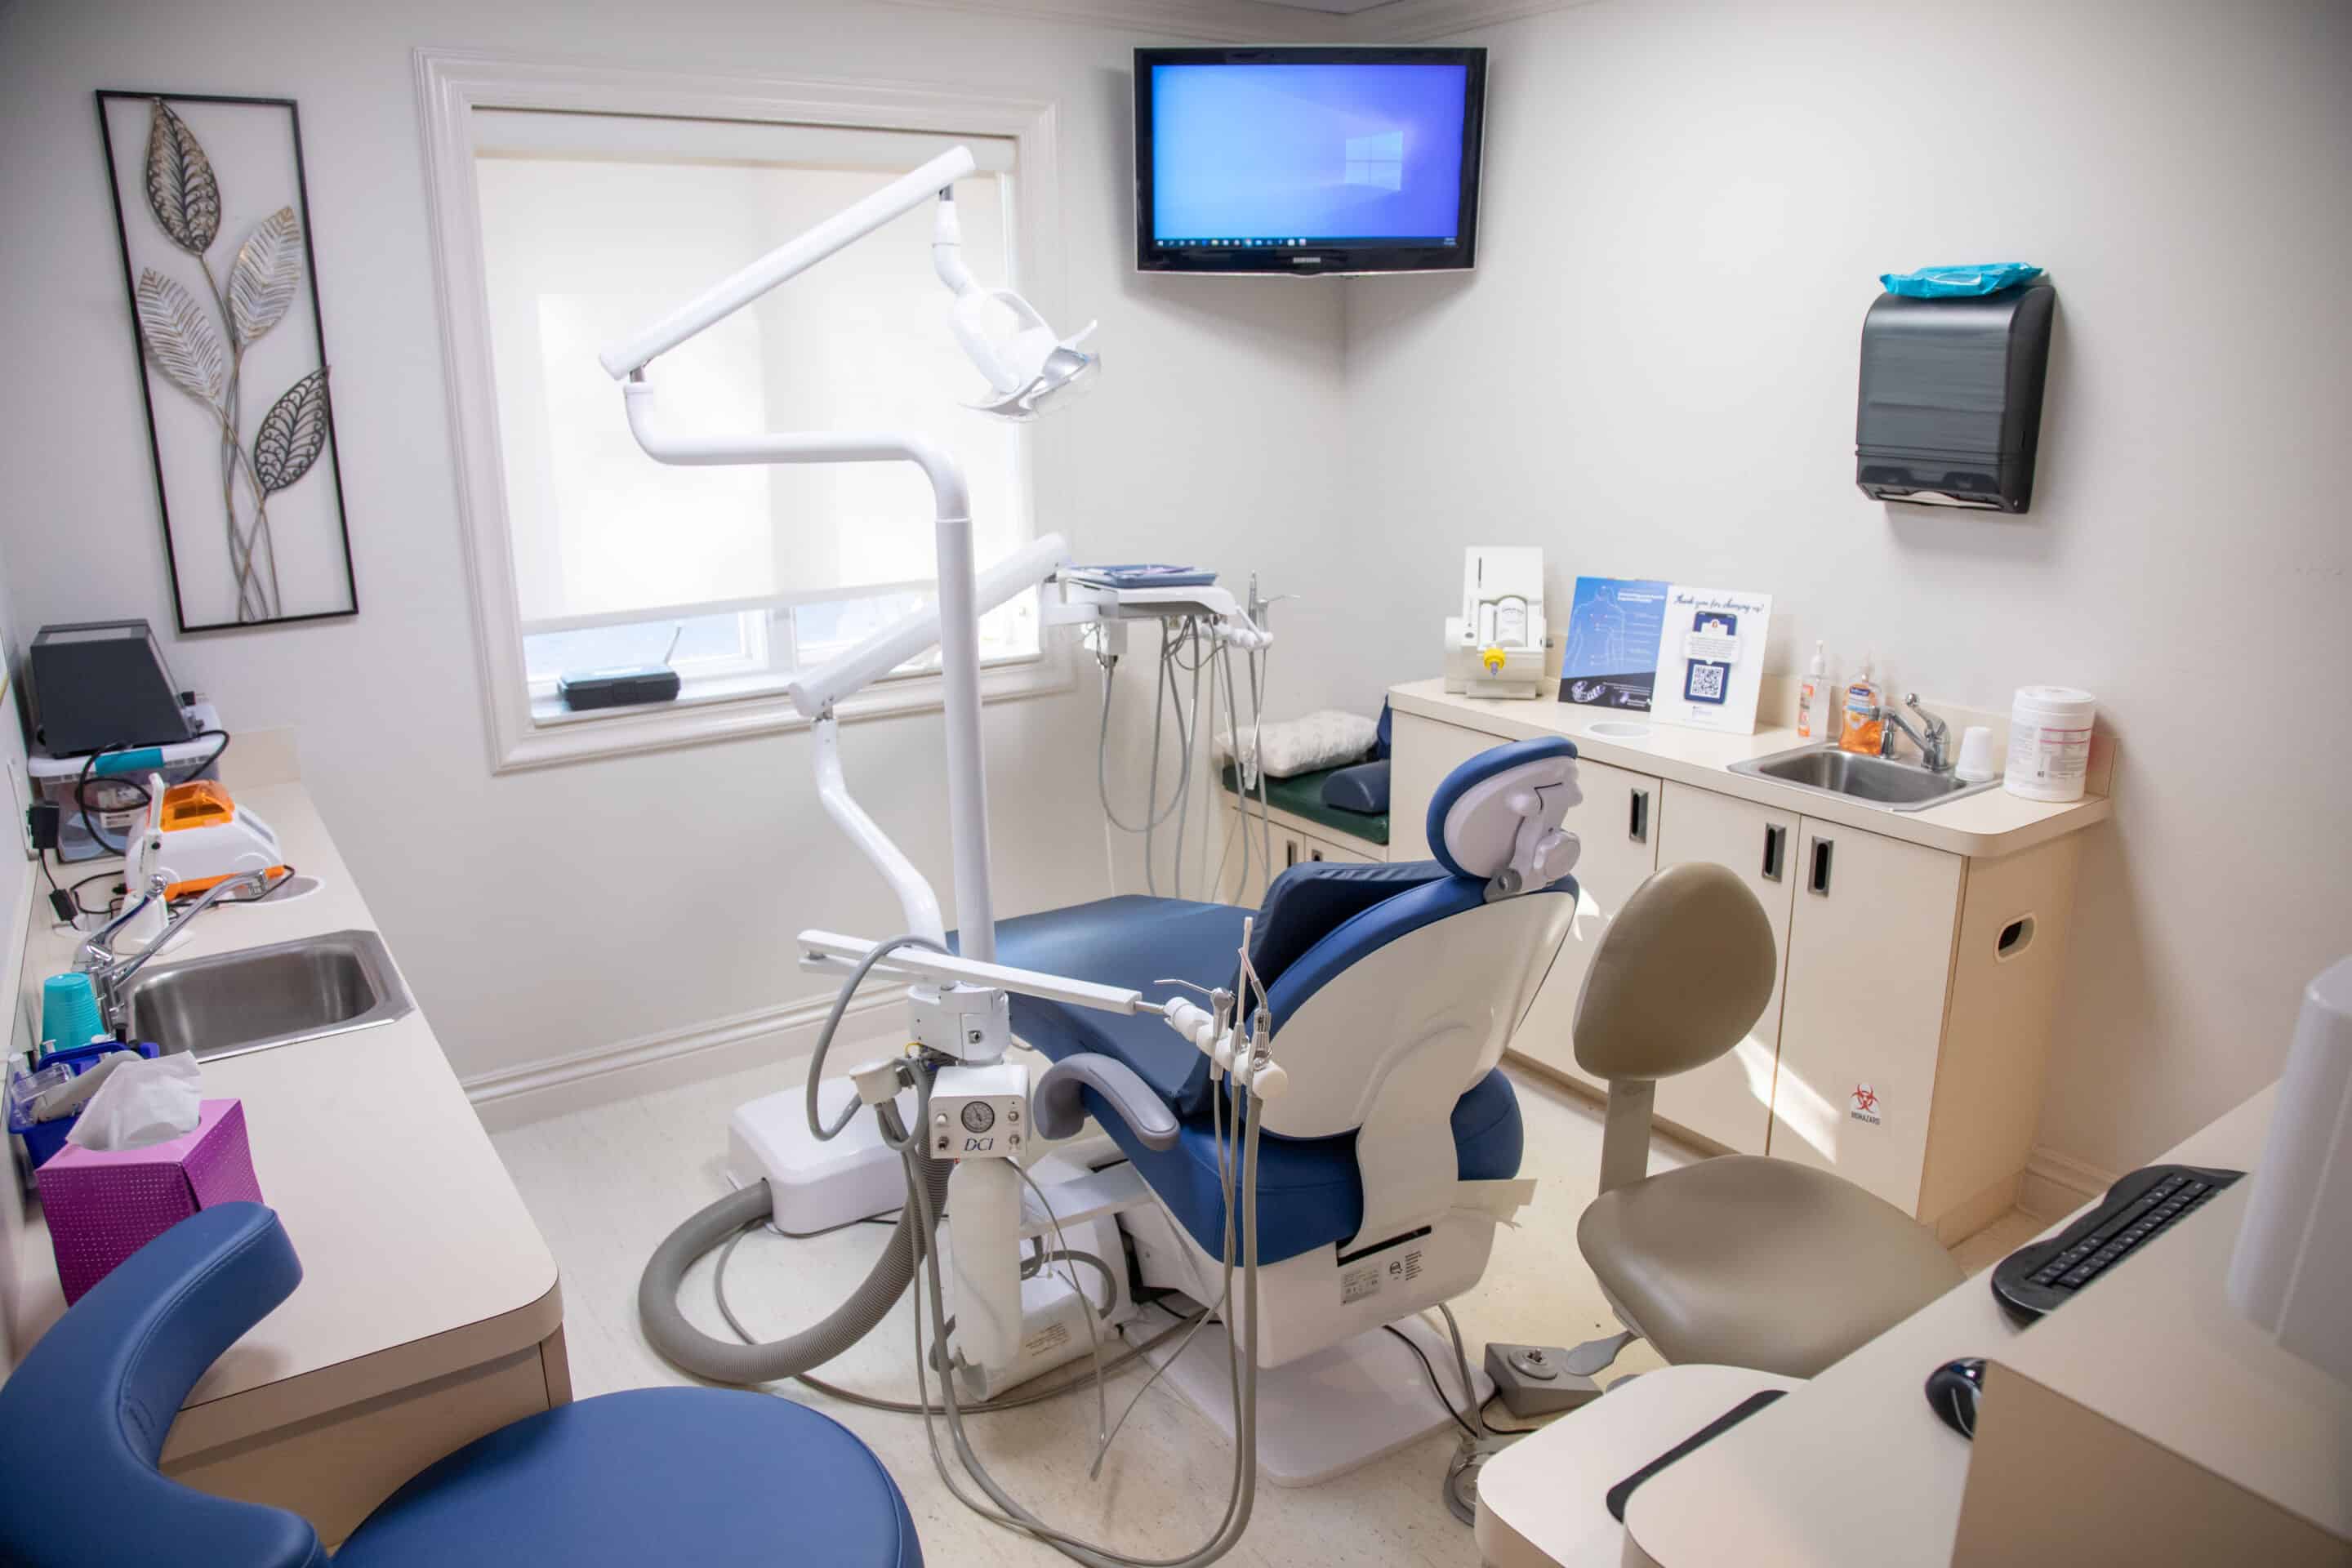 A view inside an exam room, with a computer monitor shown in the top corner and various dental equipment visible.